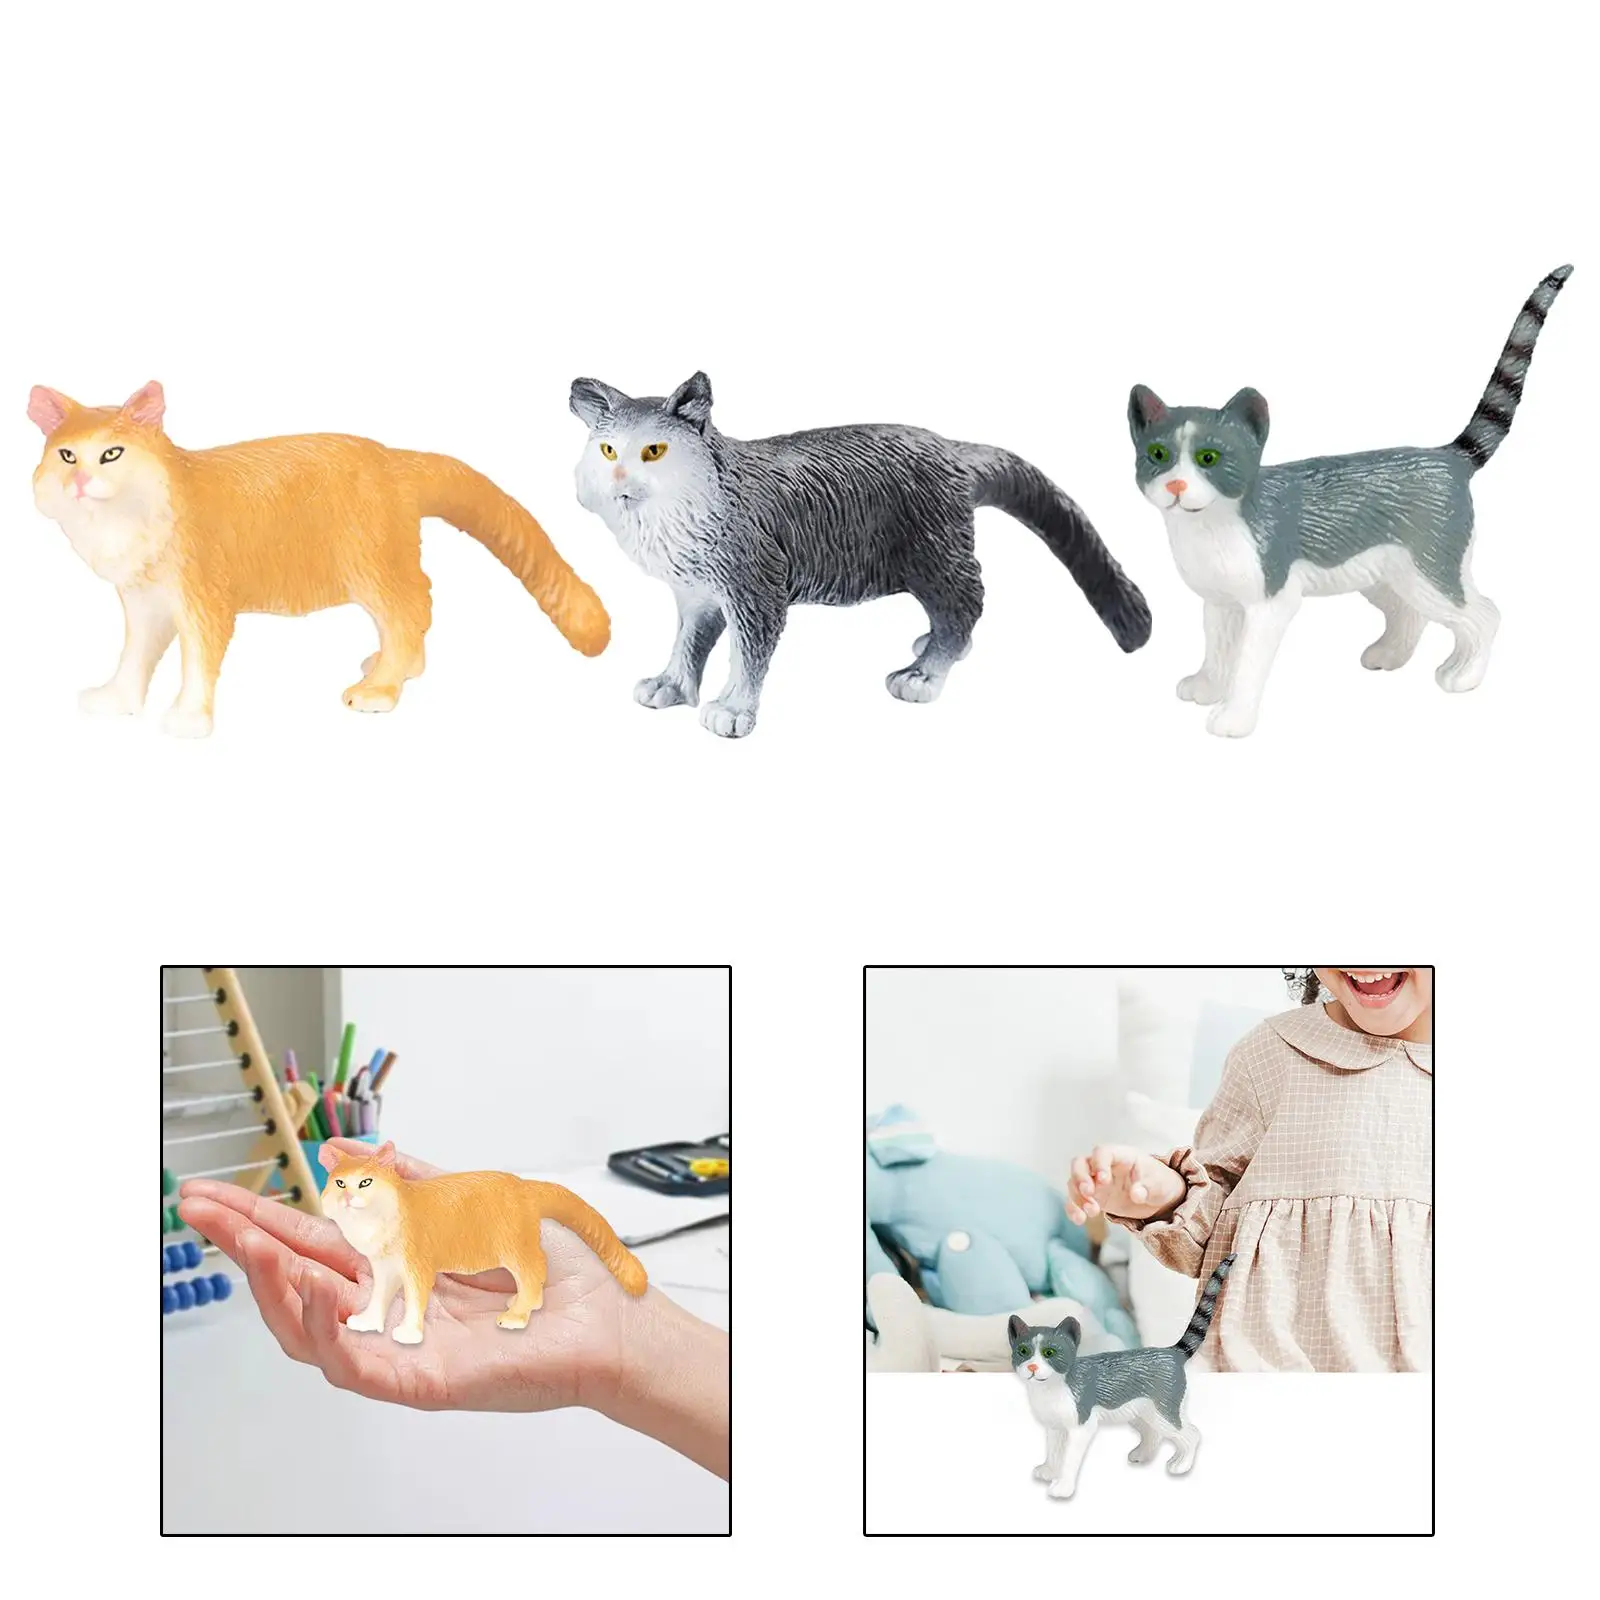 Simulation Realistic Animals Model Toys Educational Toys Collections for Birthday Gift Cake Topper Home Decor Party Favor